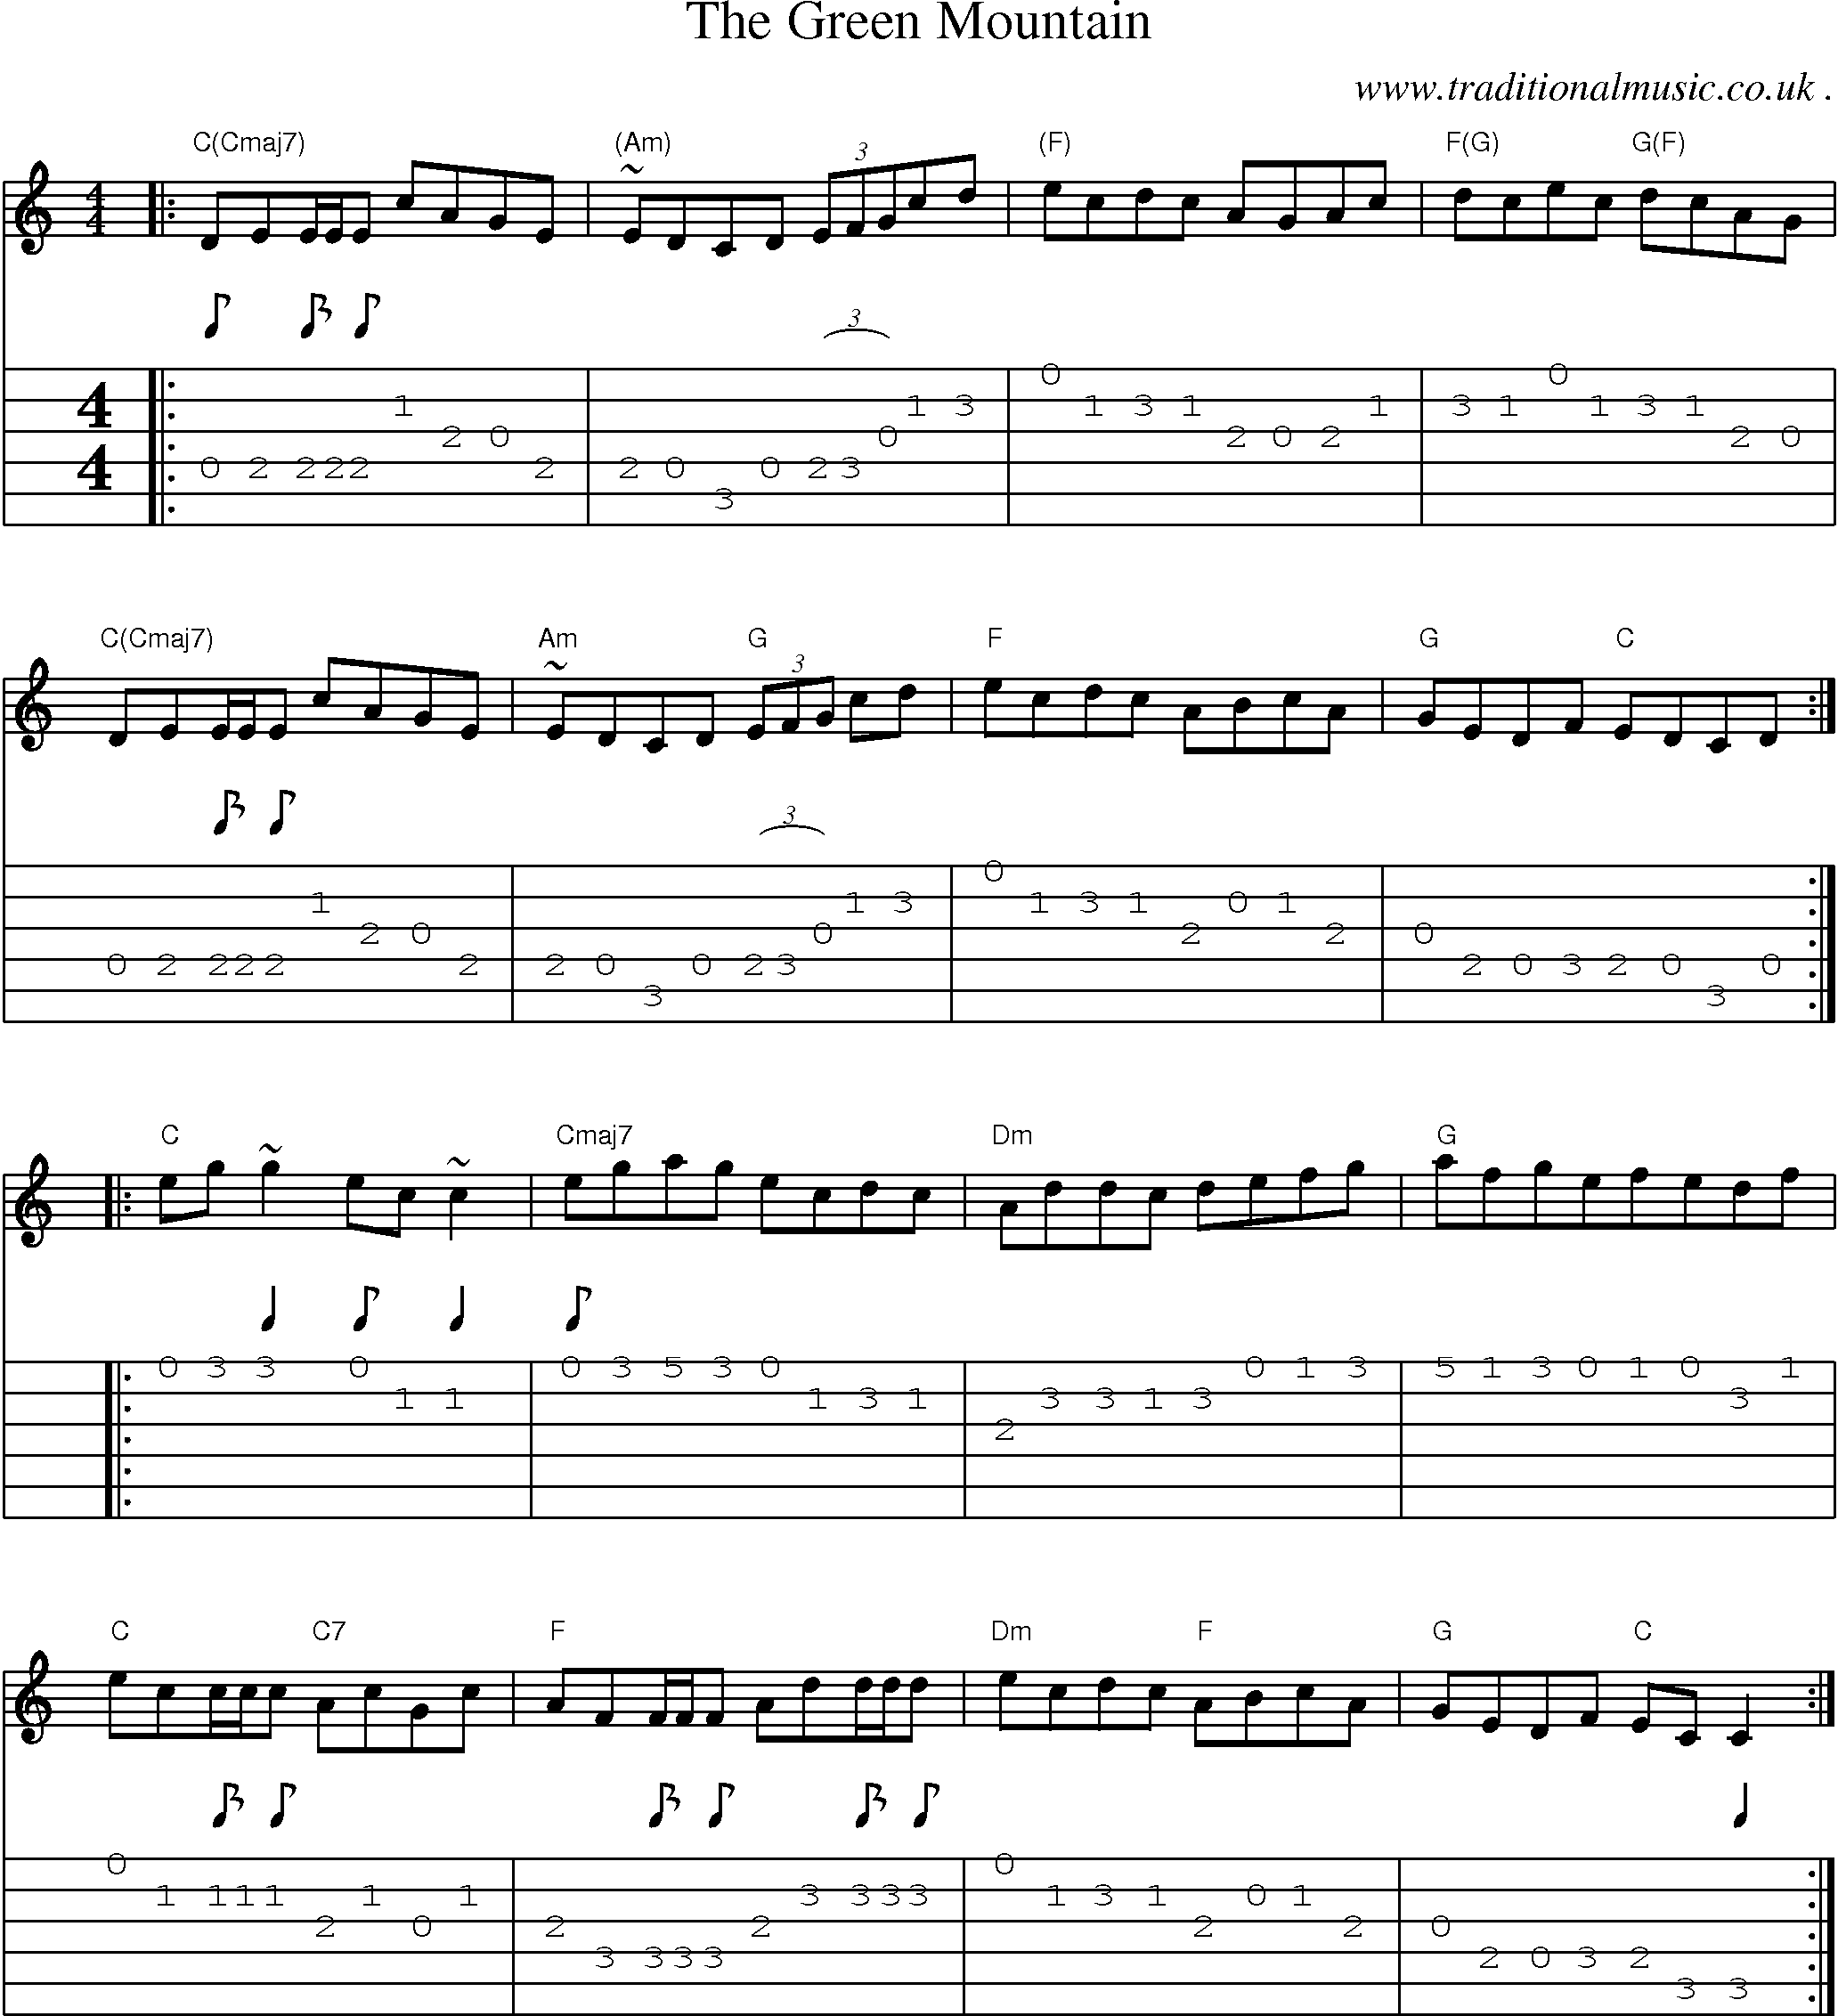 Music Score and Guitar Tabs for The Green Mountain